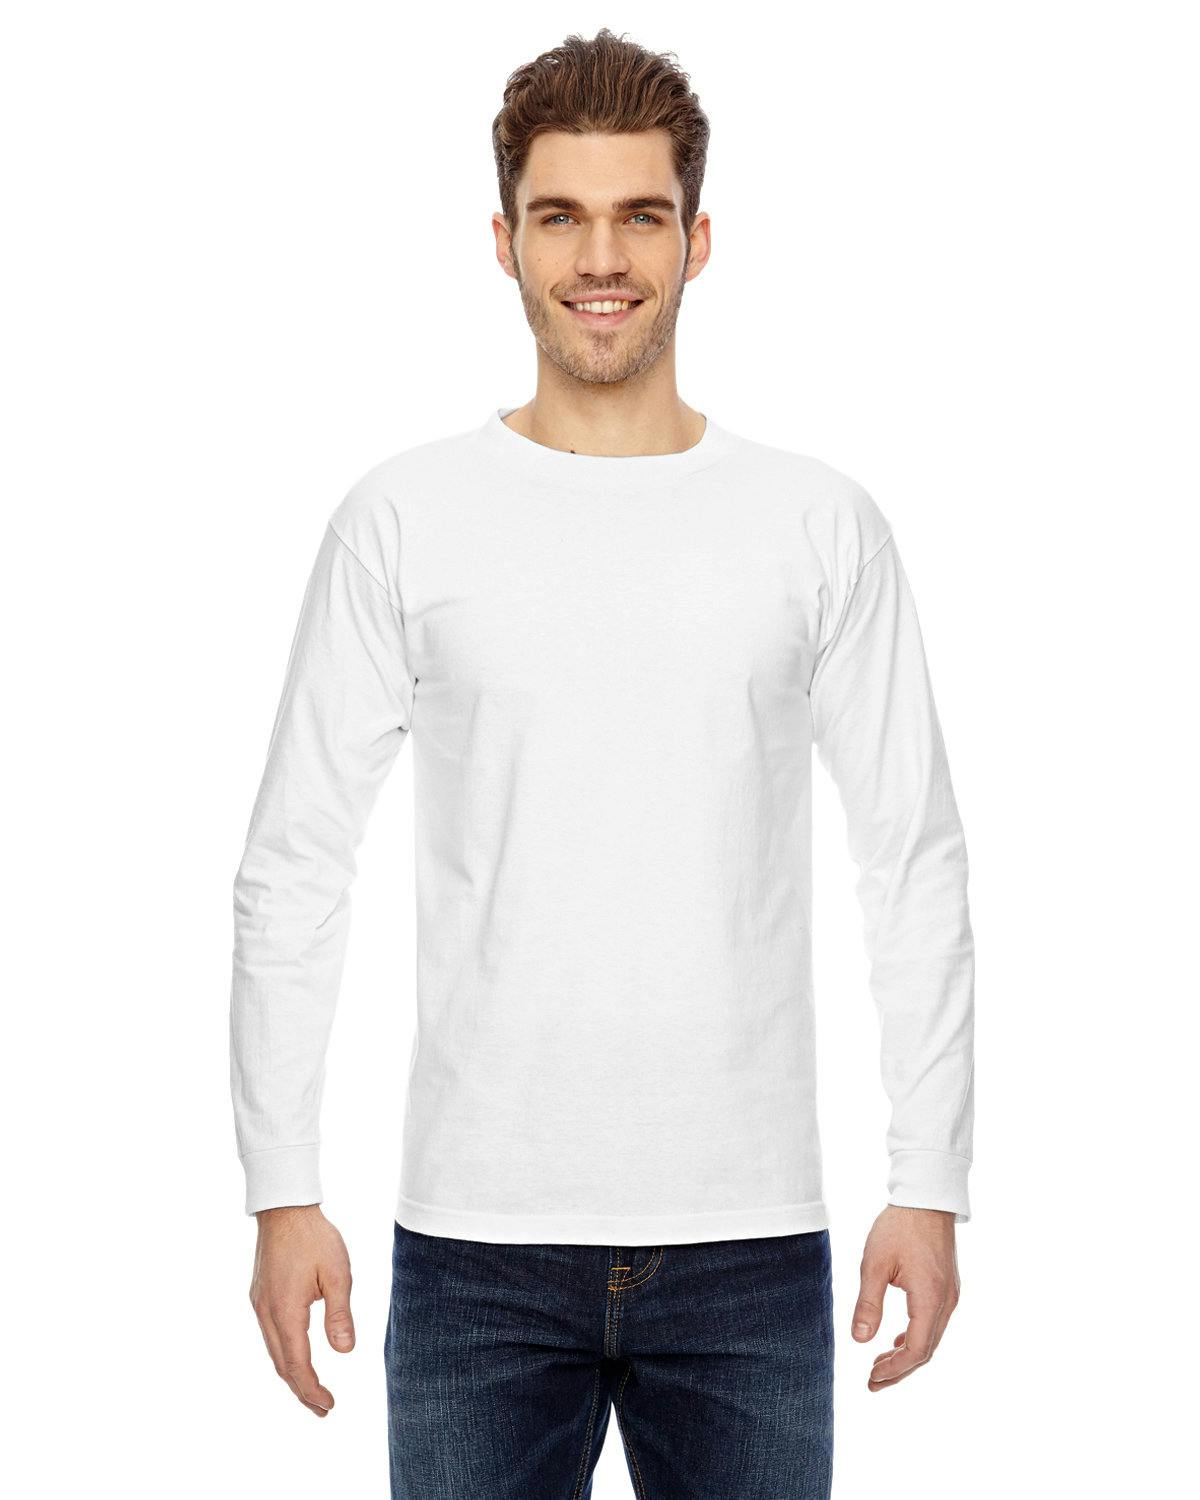 Image for Adult Long Sleeve T-Shirt